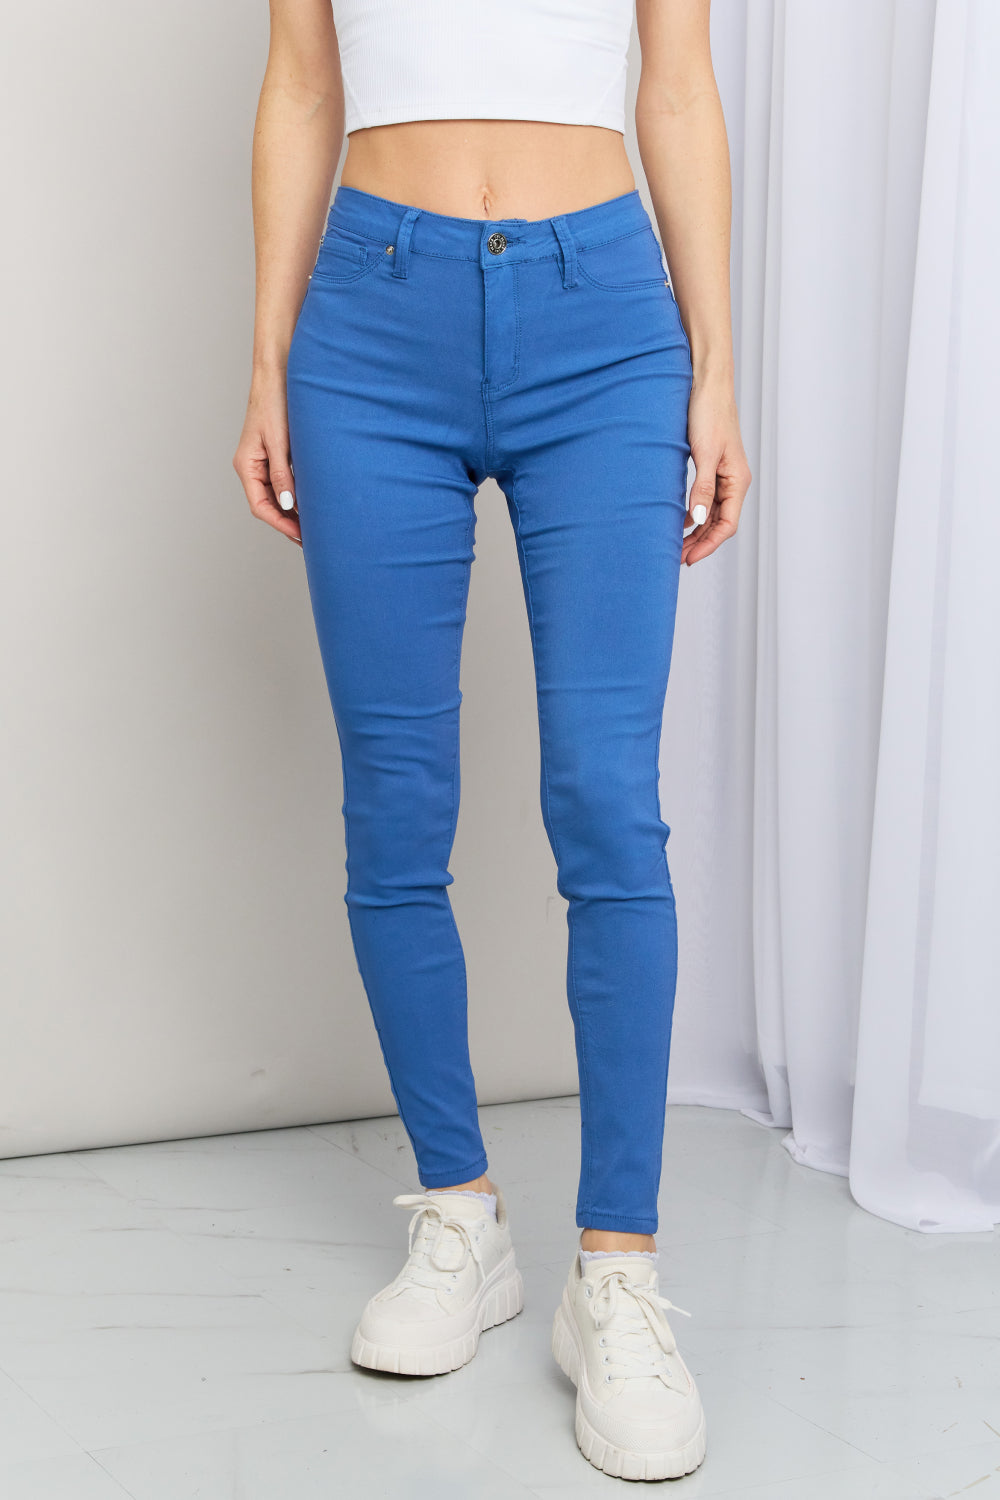 Jeanswear Kate Hyper-Stretch Full Size Mid-Rise Skinny Jeans in Electric Blue DromedarShop.com Online Boutique